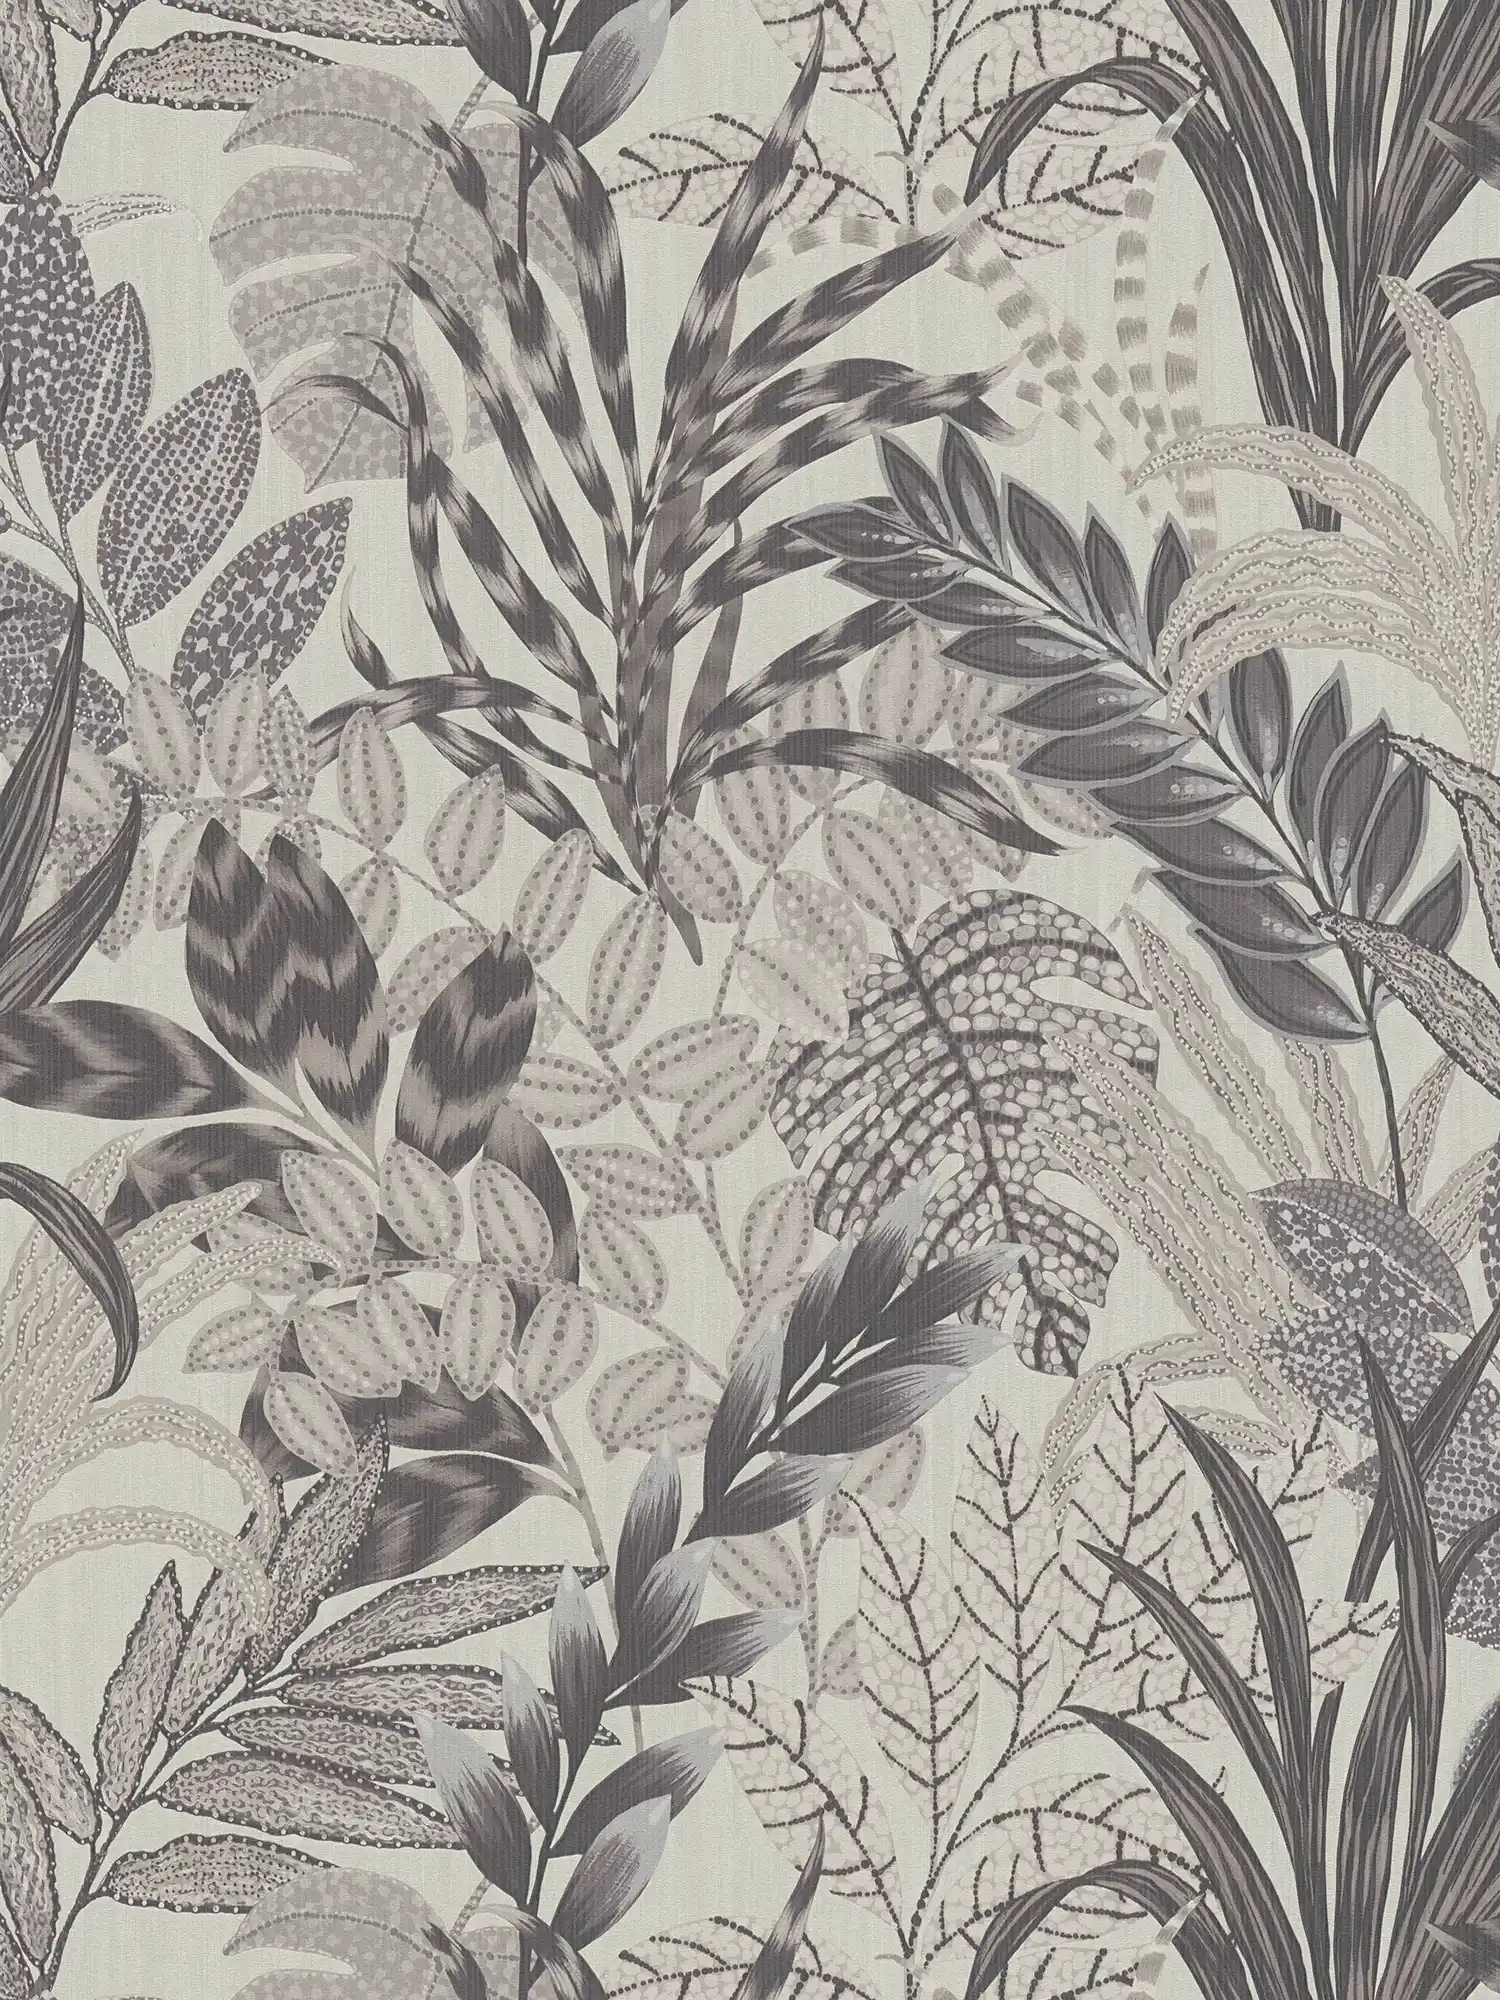         Monochrome jungle wallpaper with embossed texture - grey, white
    